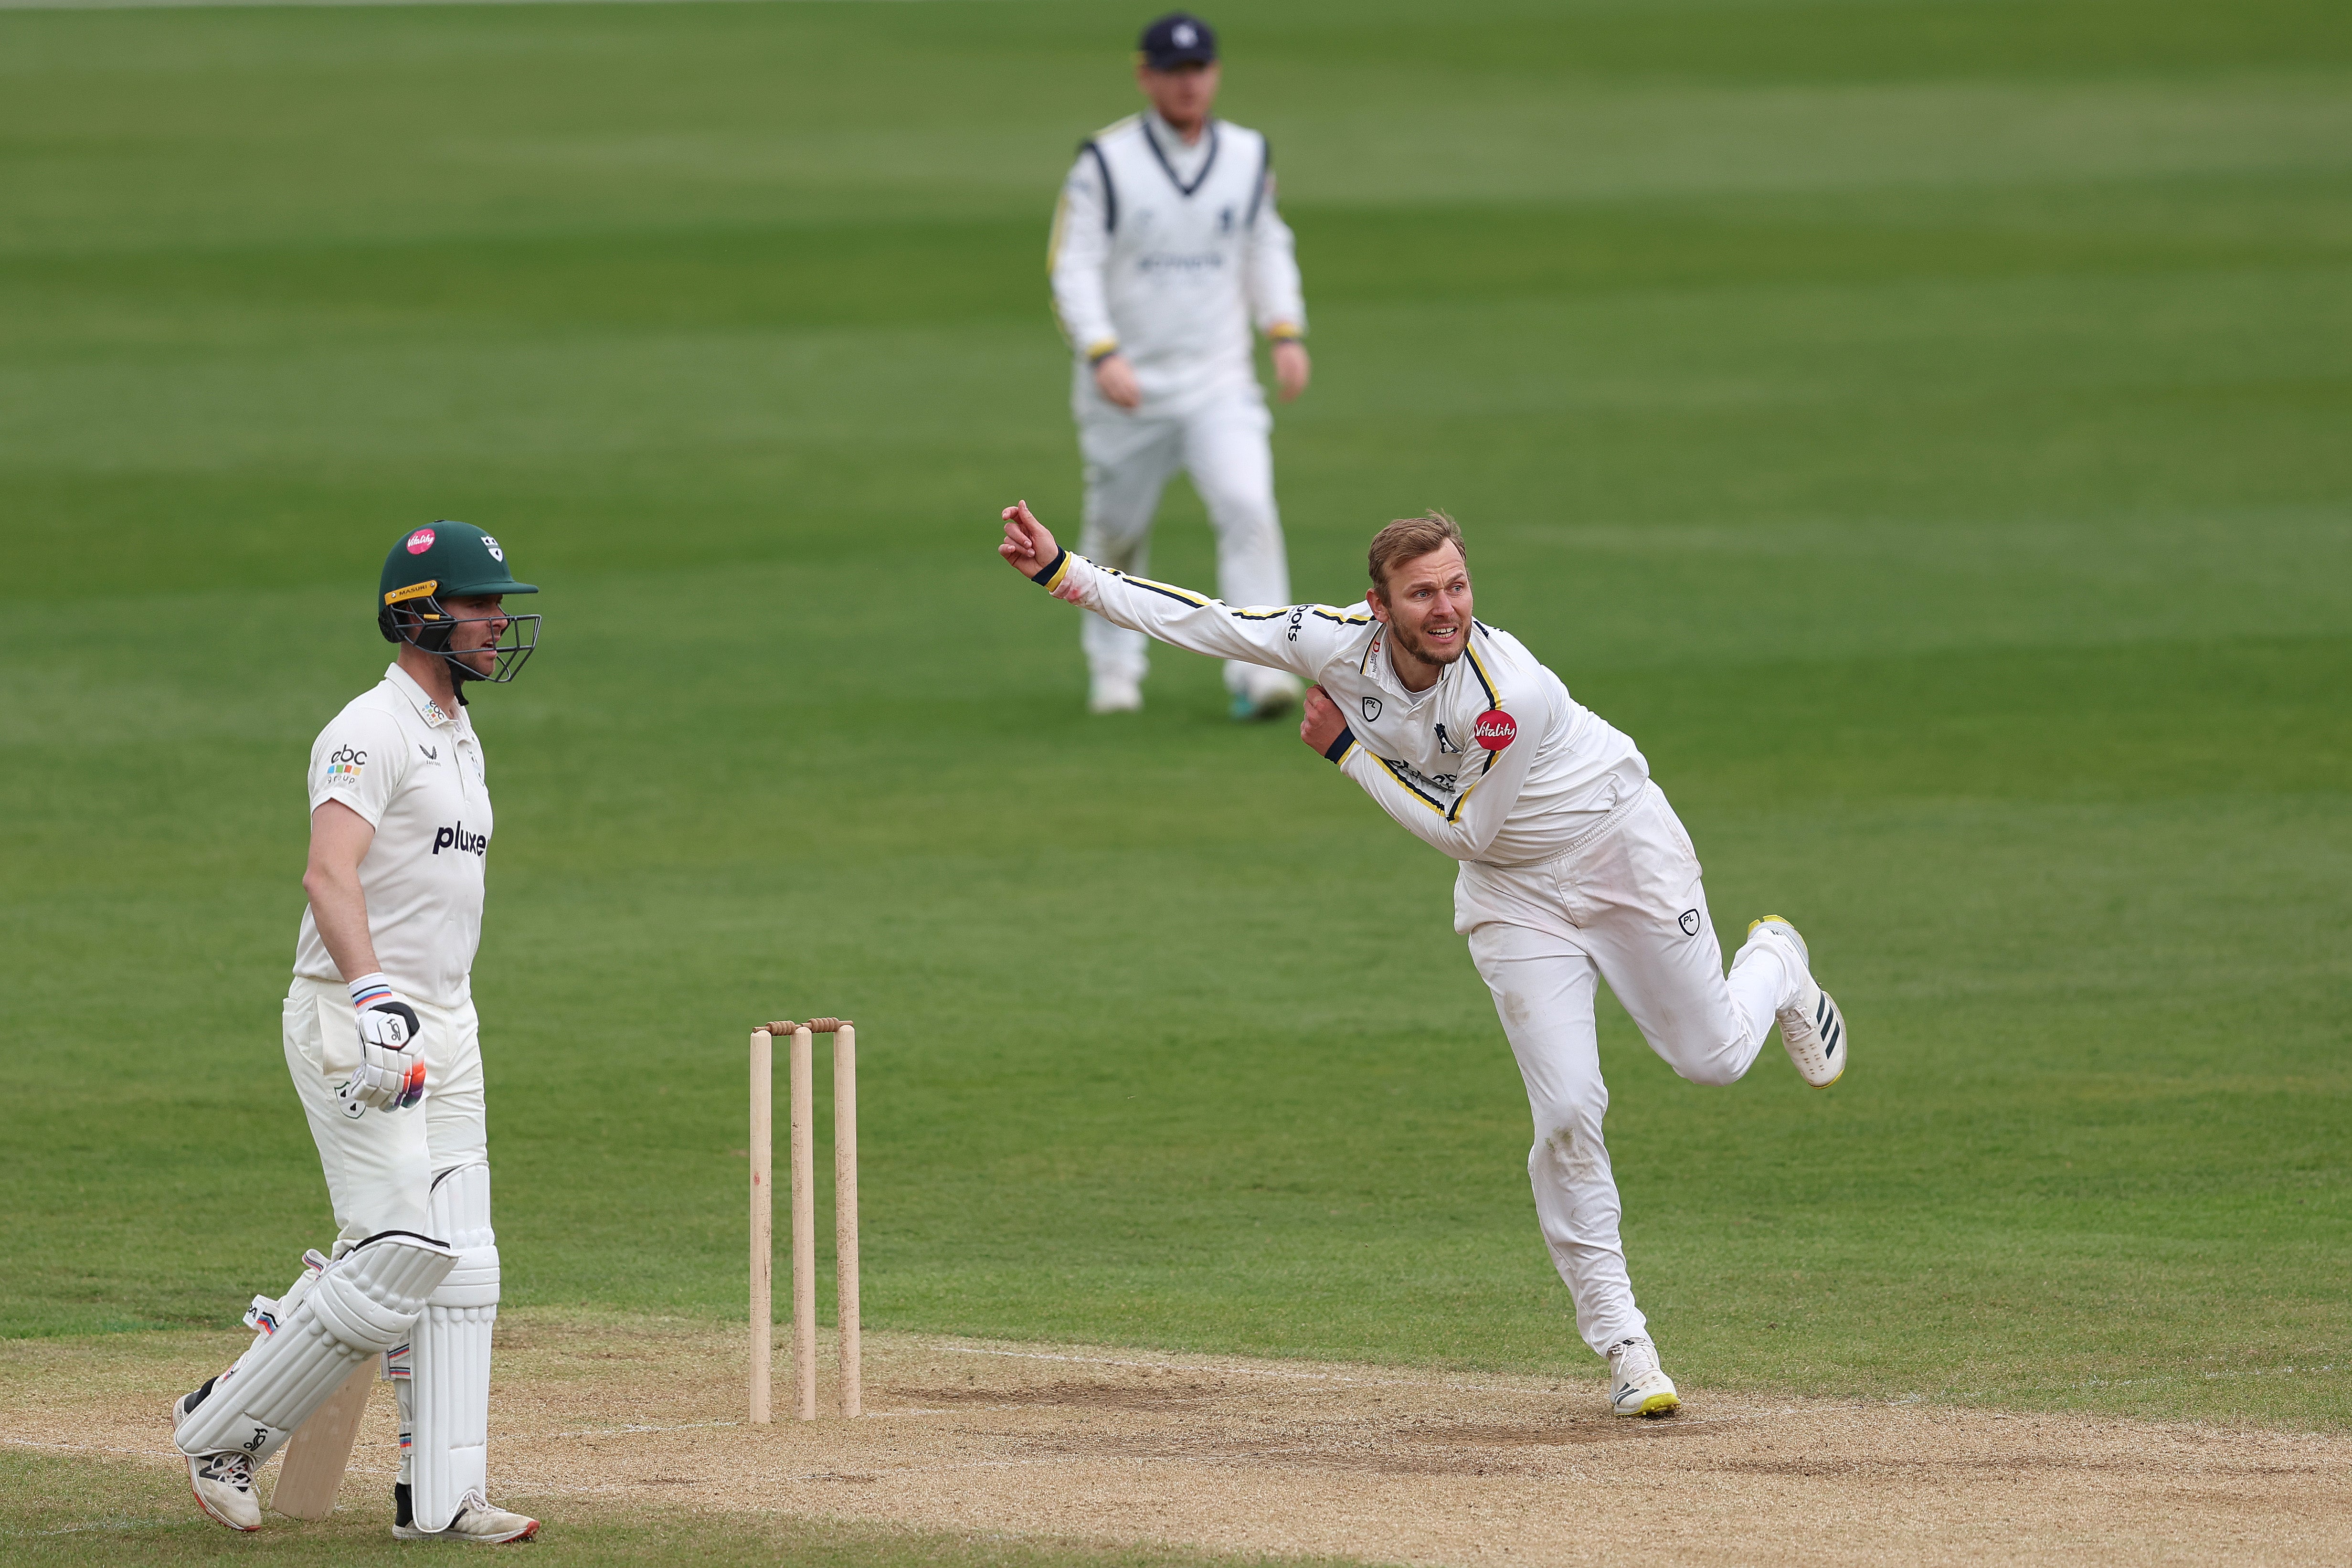 Warwickshire’s Danny Briggs bowling on day three of their County Championship match against Worcestershire